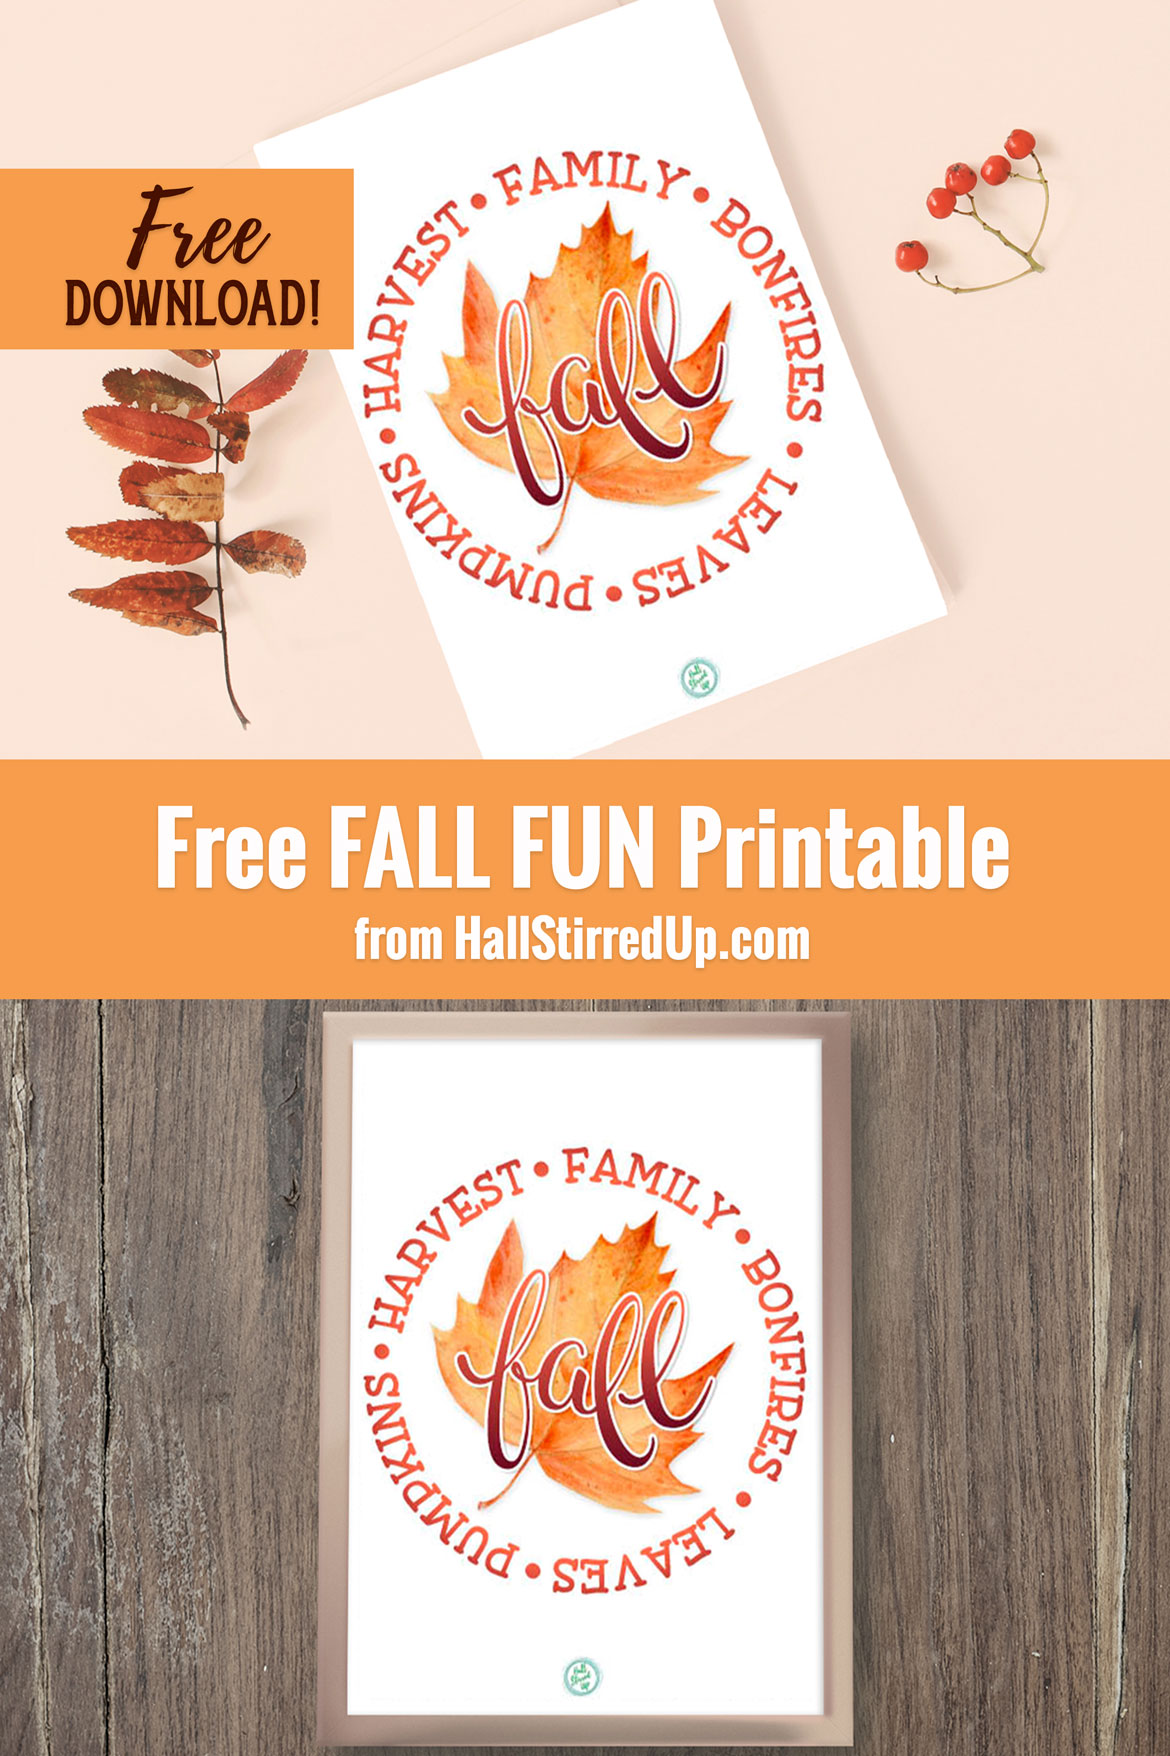 All the fall fun and a pretty free printable